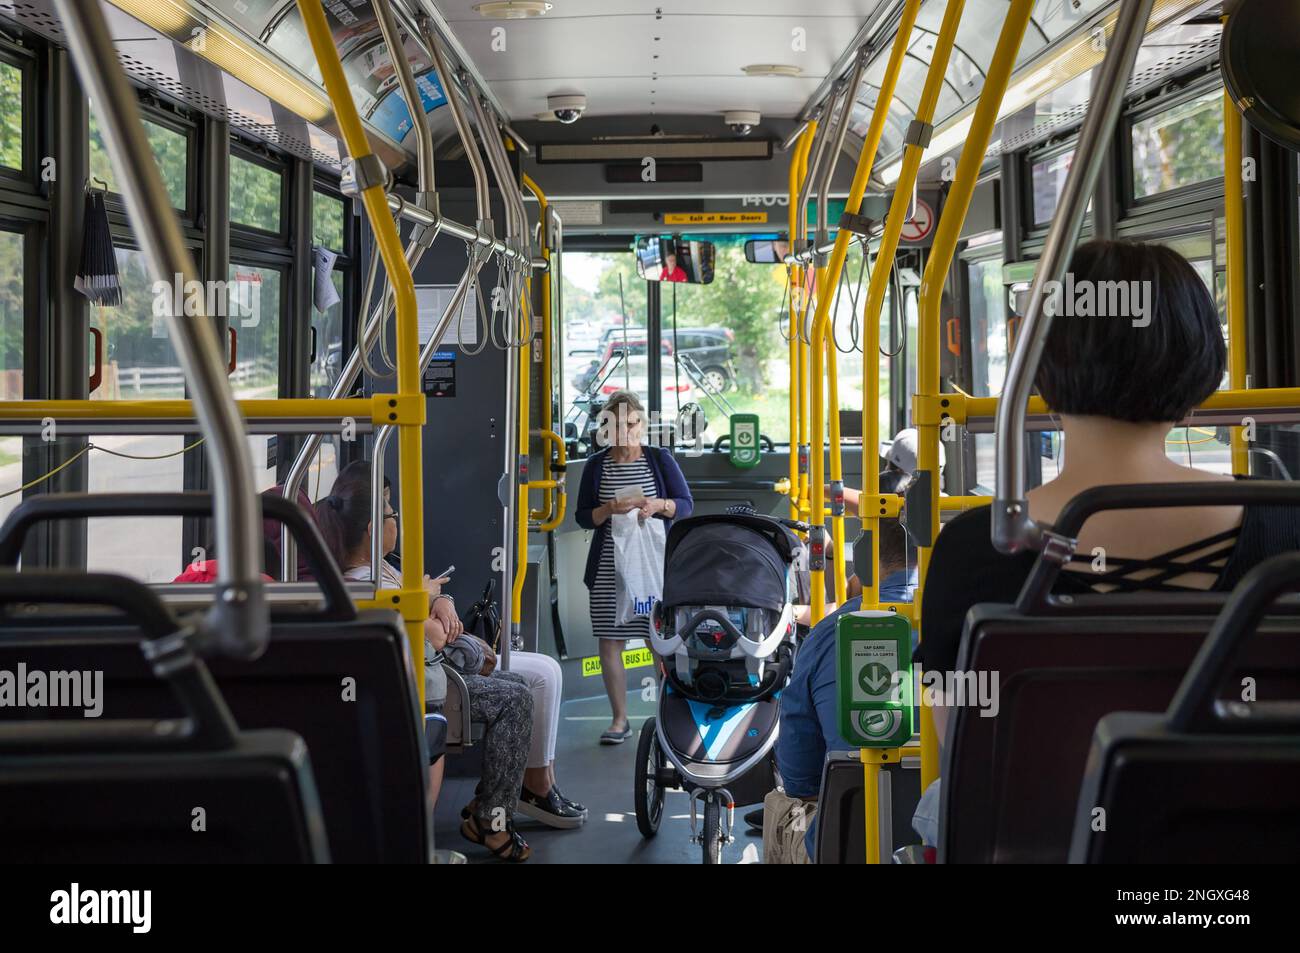 Toronto, Canada - 09 01 2018: Passengers in Toronto Transit Commission bus. Riders can pay their fares with Presto Card using wireless validators Stock Photo